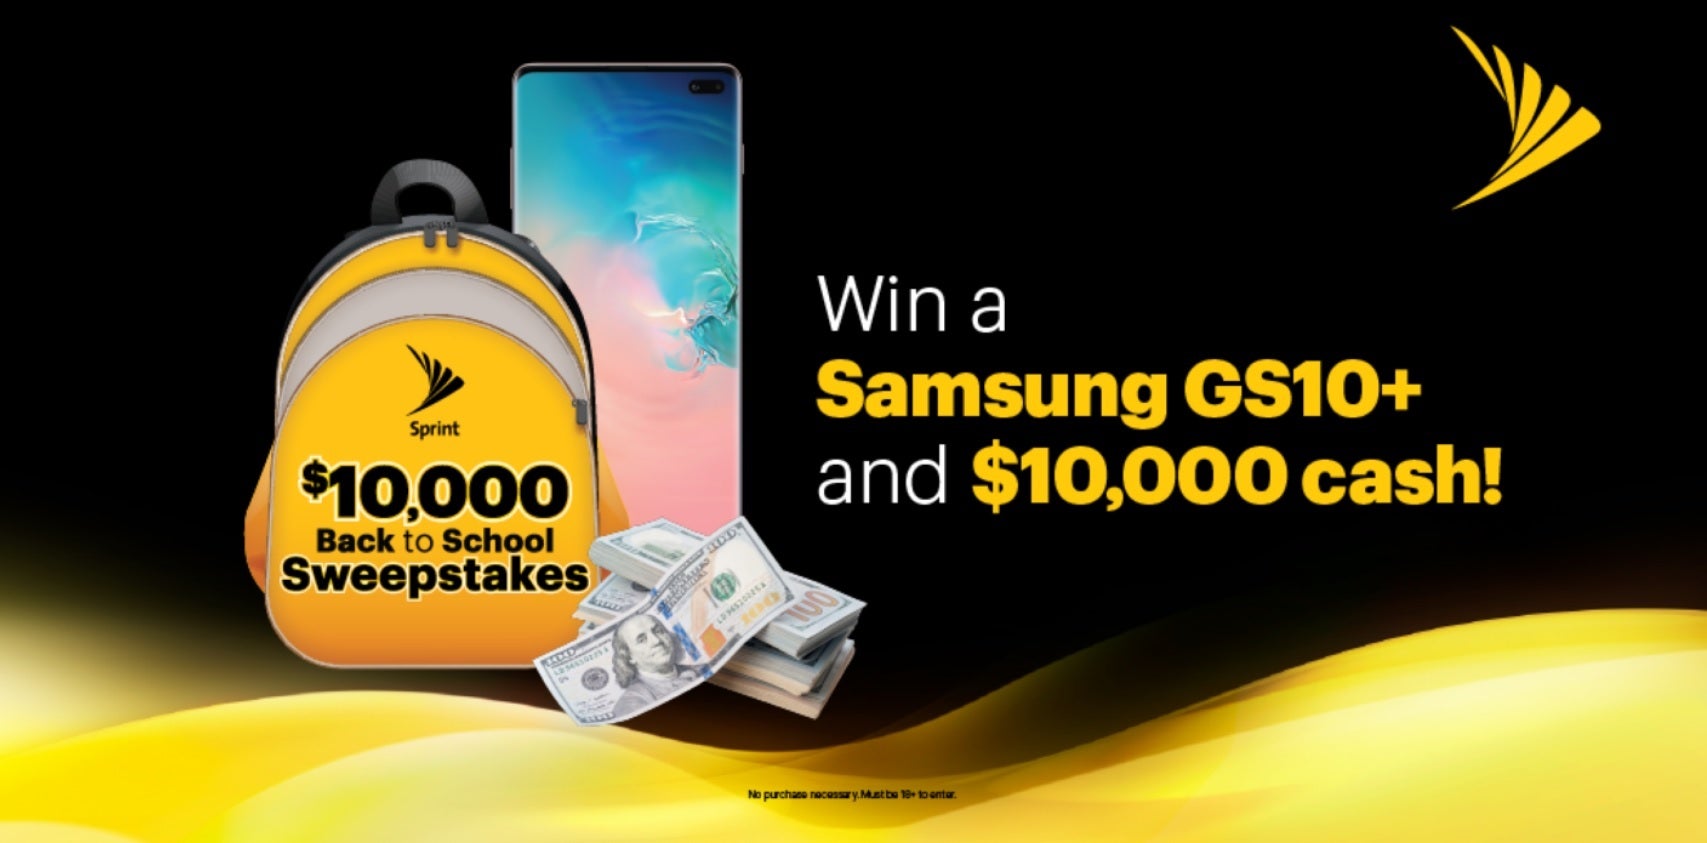 Win a Samsung Galaxy S10+ and $10,000 from Sprint - Win a Samsung Galaxy S10+ and $10,000 in Sprint's new sweepstakes (U.S. residents only)